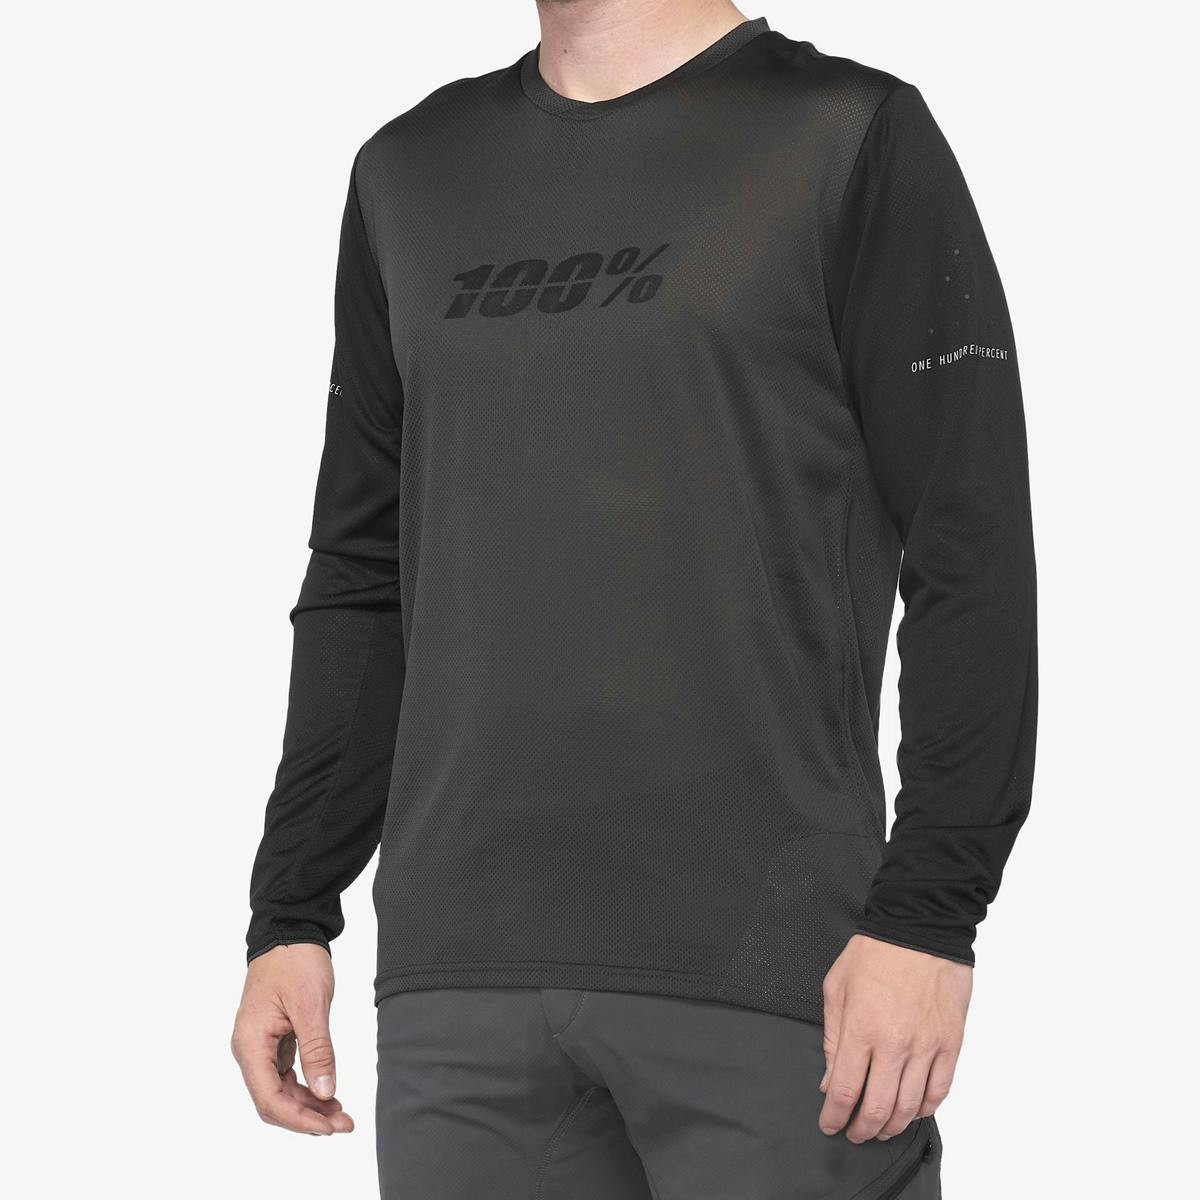 100% Ridecamp Long Sleeve Jersey - Black/Charcoal - Small